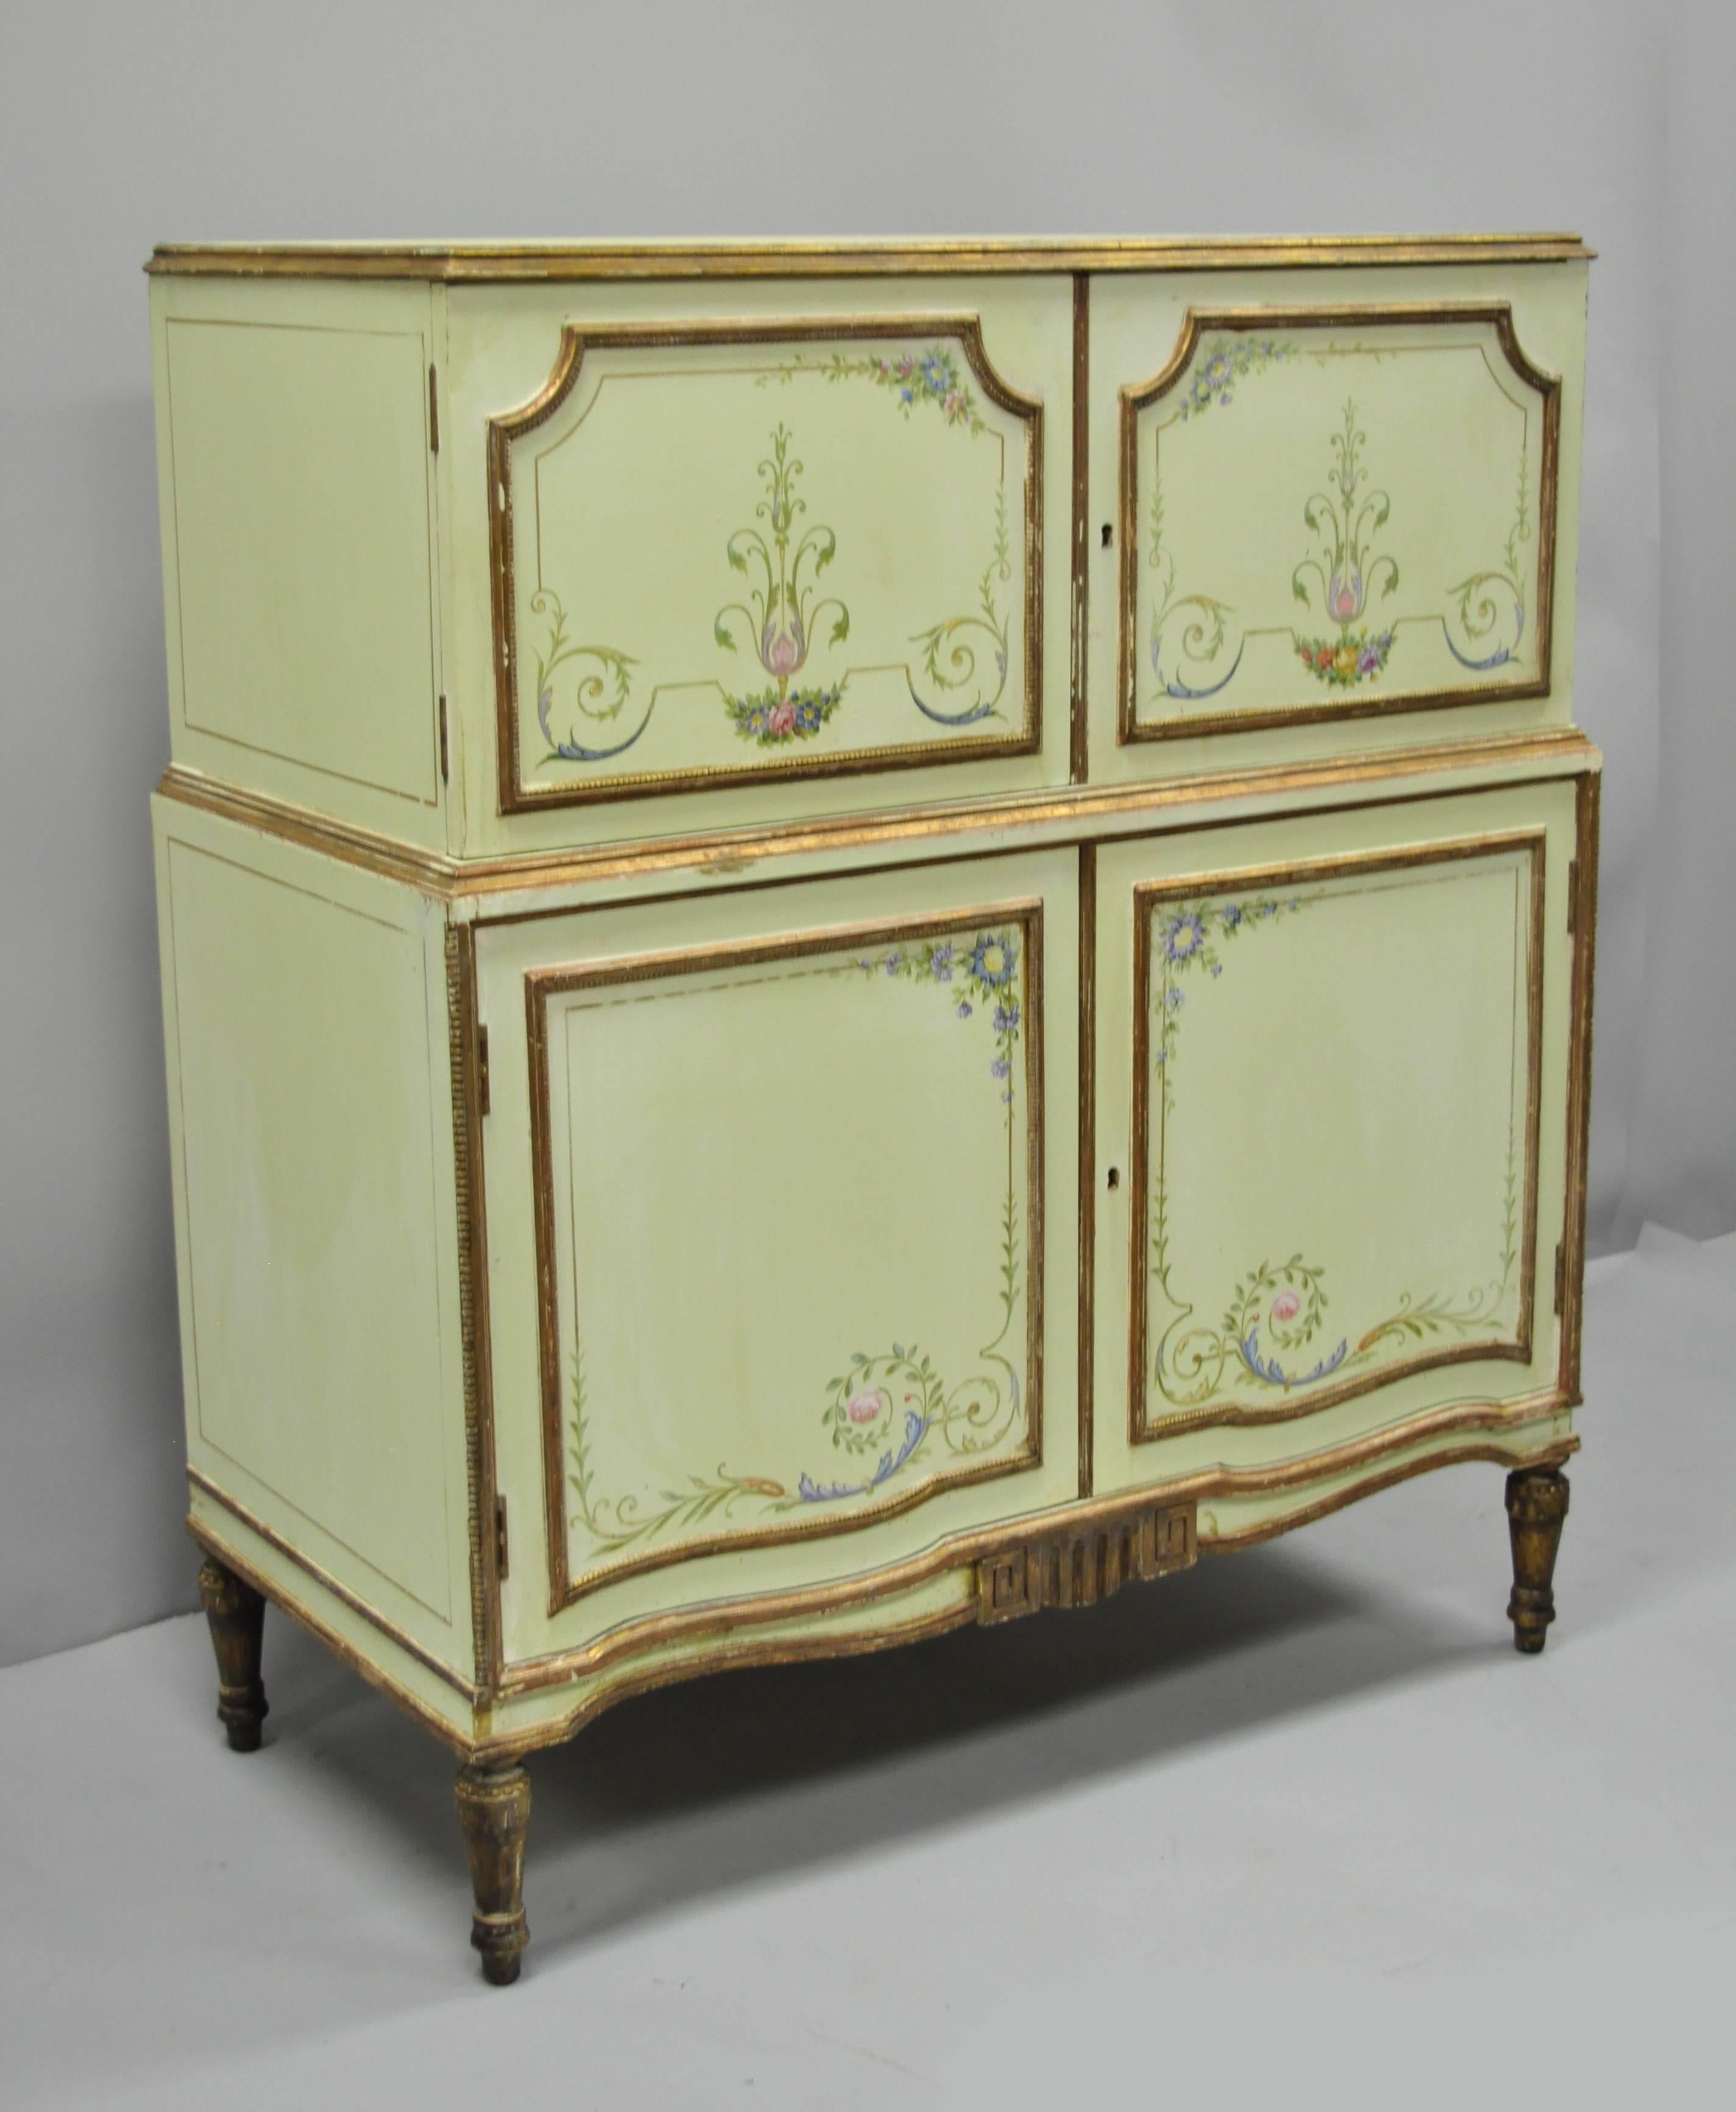 Antique Adams Style Green Painted Chest of Drawers Dresser by New York Galleries 5